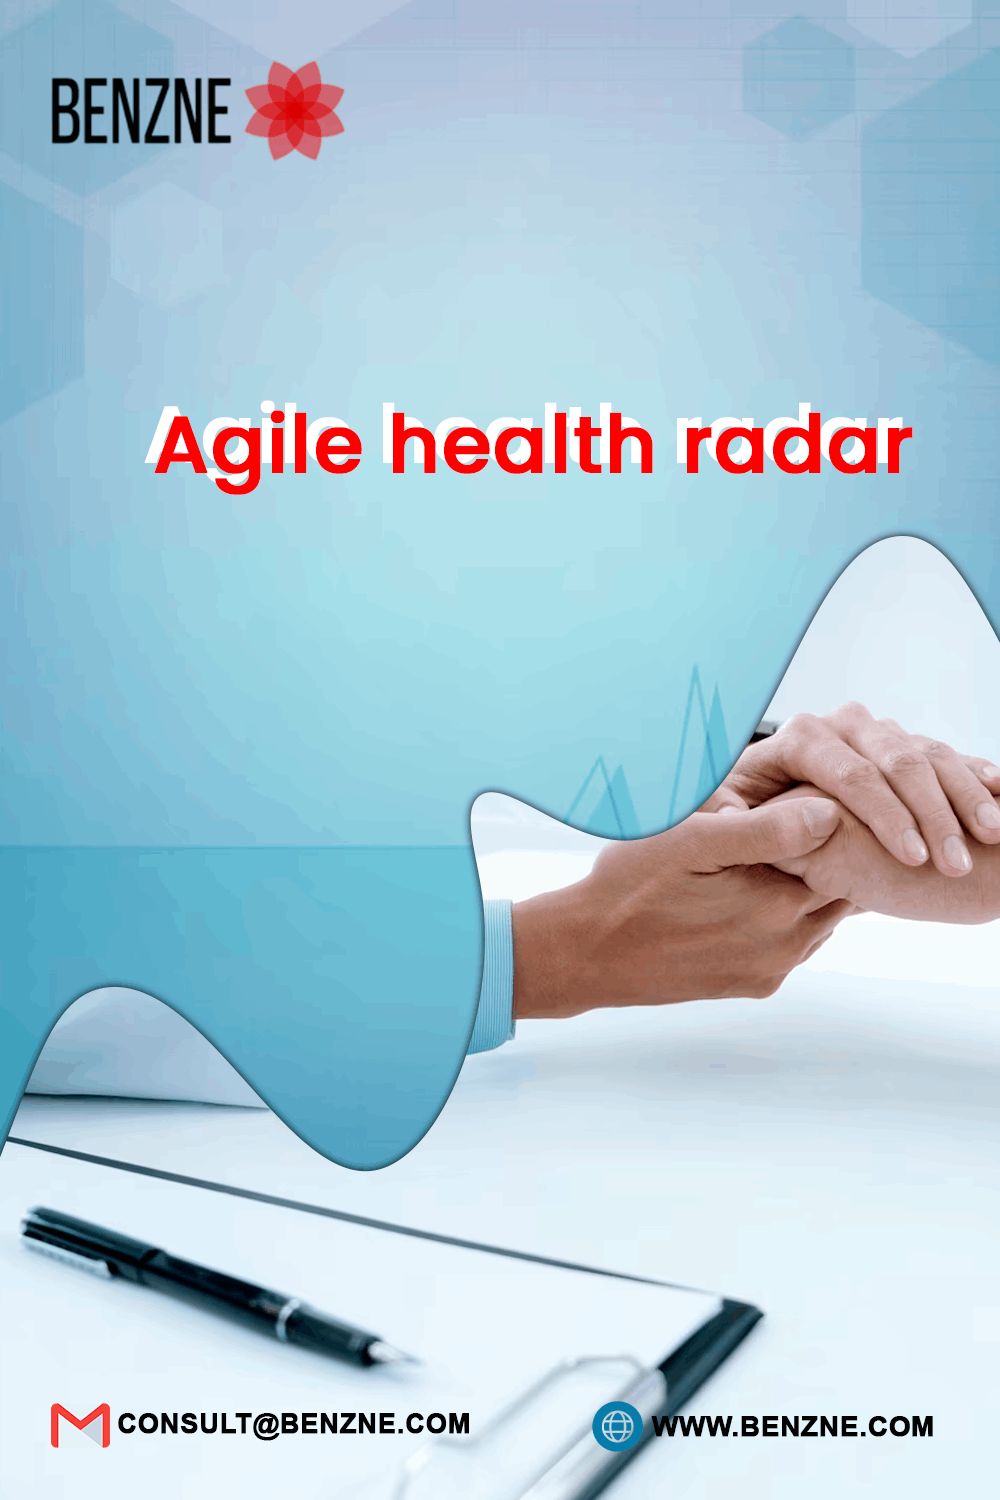 Benzne Agile Health Radar To Track Better Maturity And Performance Insights